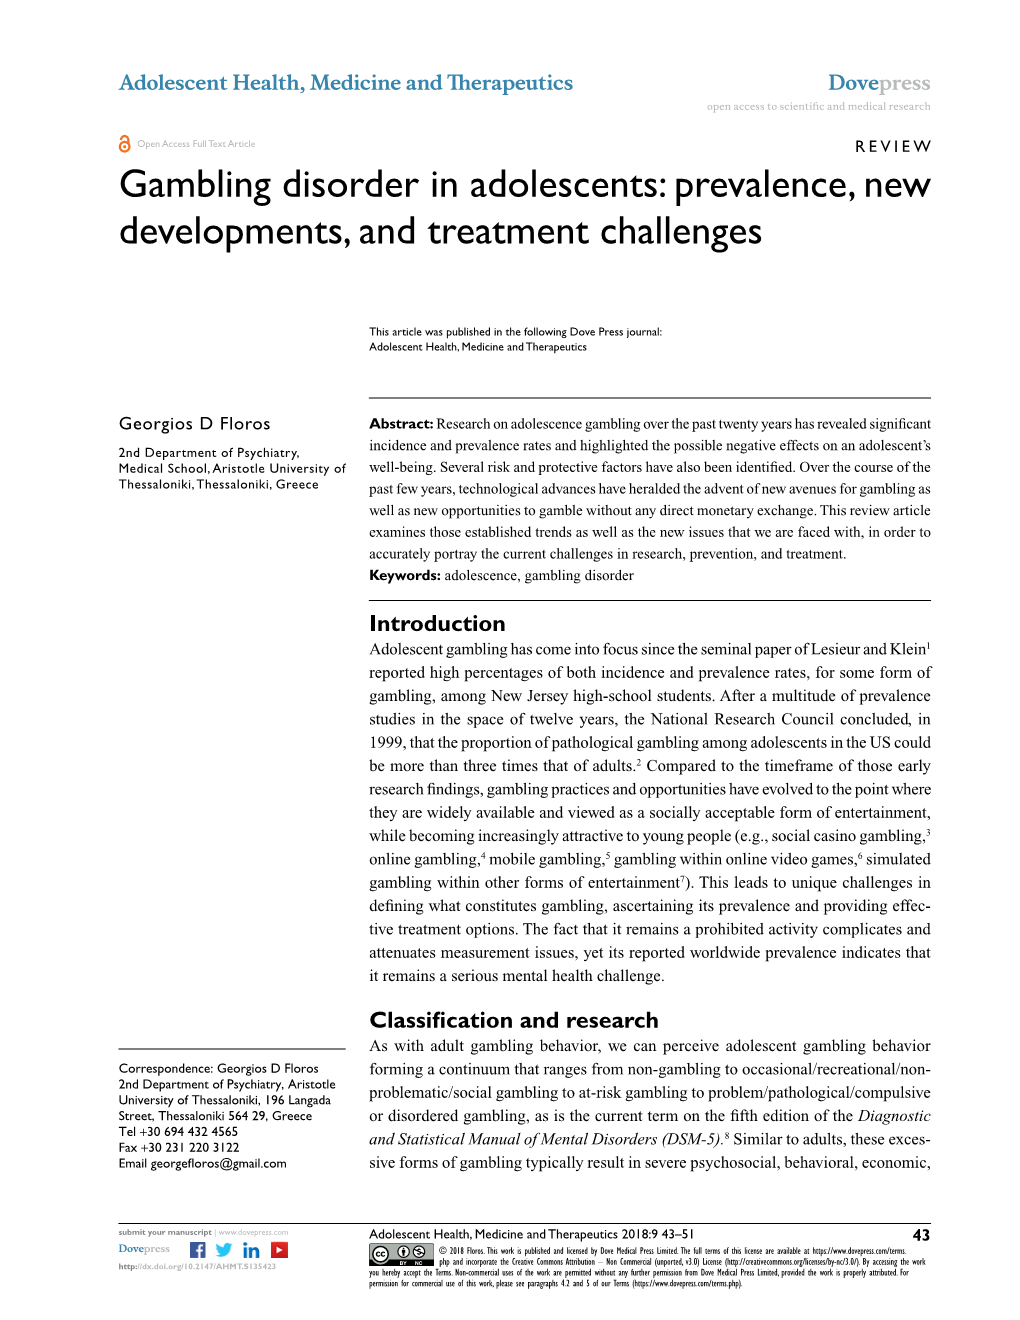 Gambling Disorder in Adolescents: Prevalence, New Developments, and Treatment Challenges